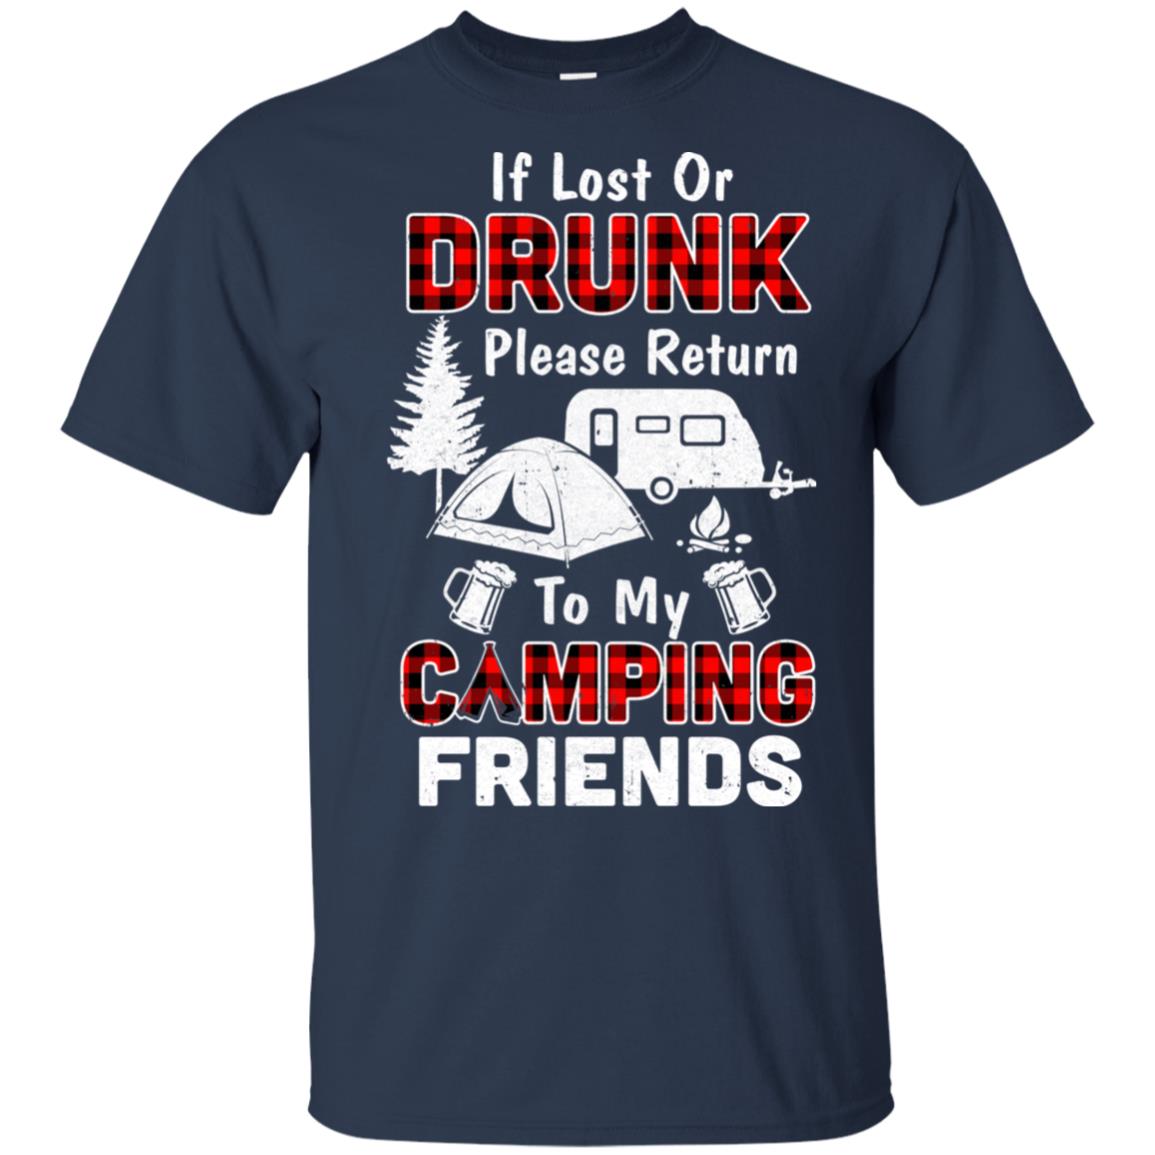 If Lost or Drunk Please Return to Hiking Friend Hiking Shirt, Hiking Gifts,  Adventure Shirt, Hiking Gifts for Women, Hiking Gifts for Men -  Canada